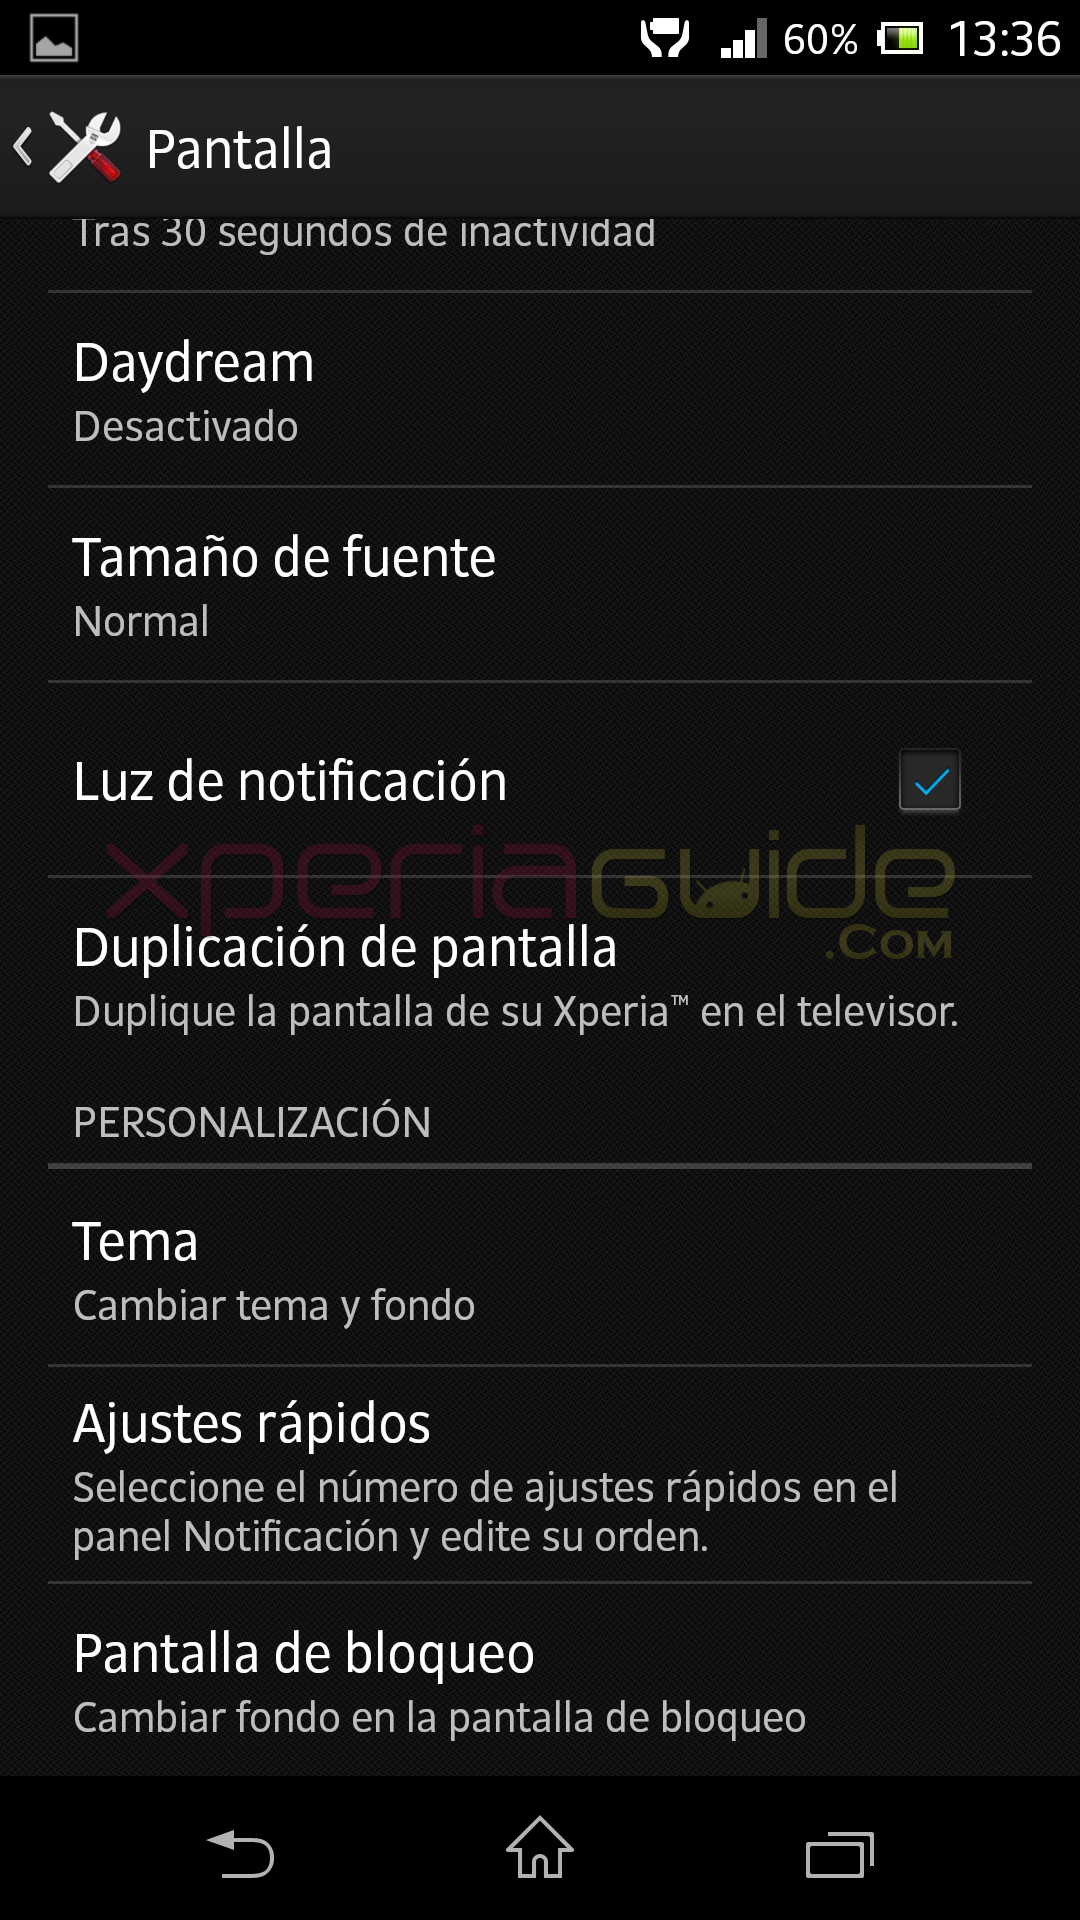 Screen Settings in Xperia Z C6603 Android 4.2.2 Jelly Bean 10.3.A.0.423